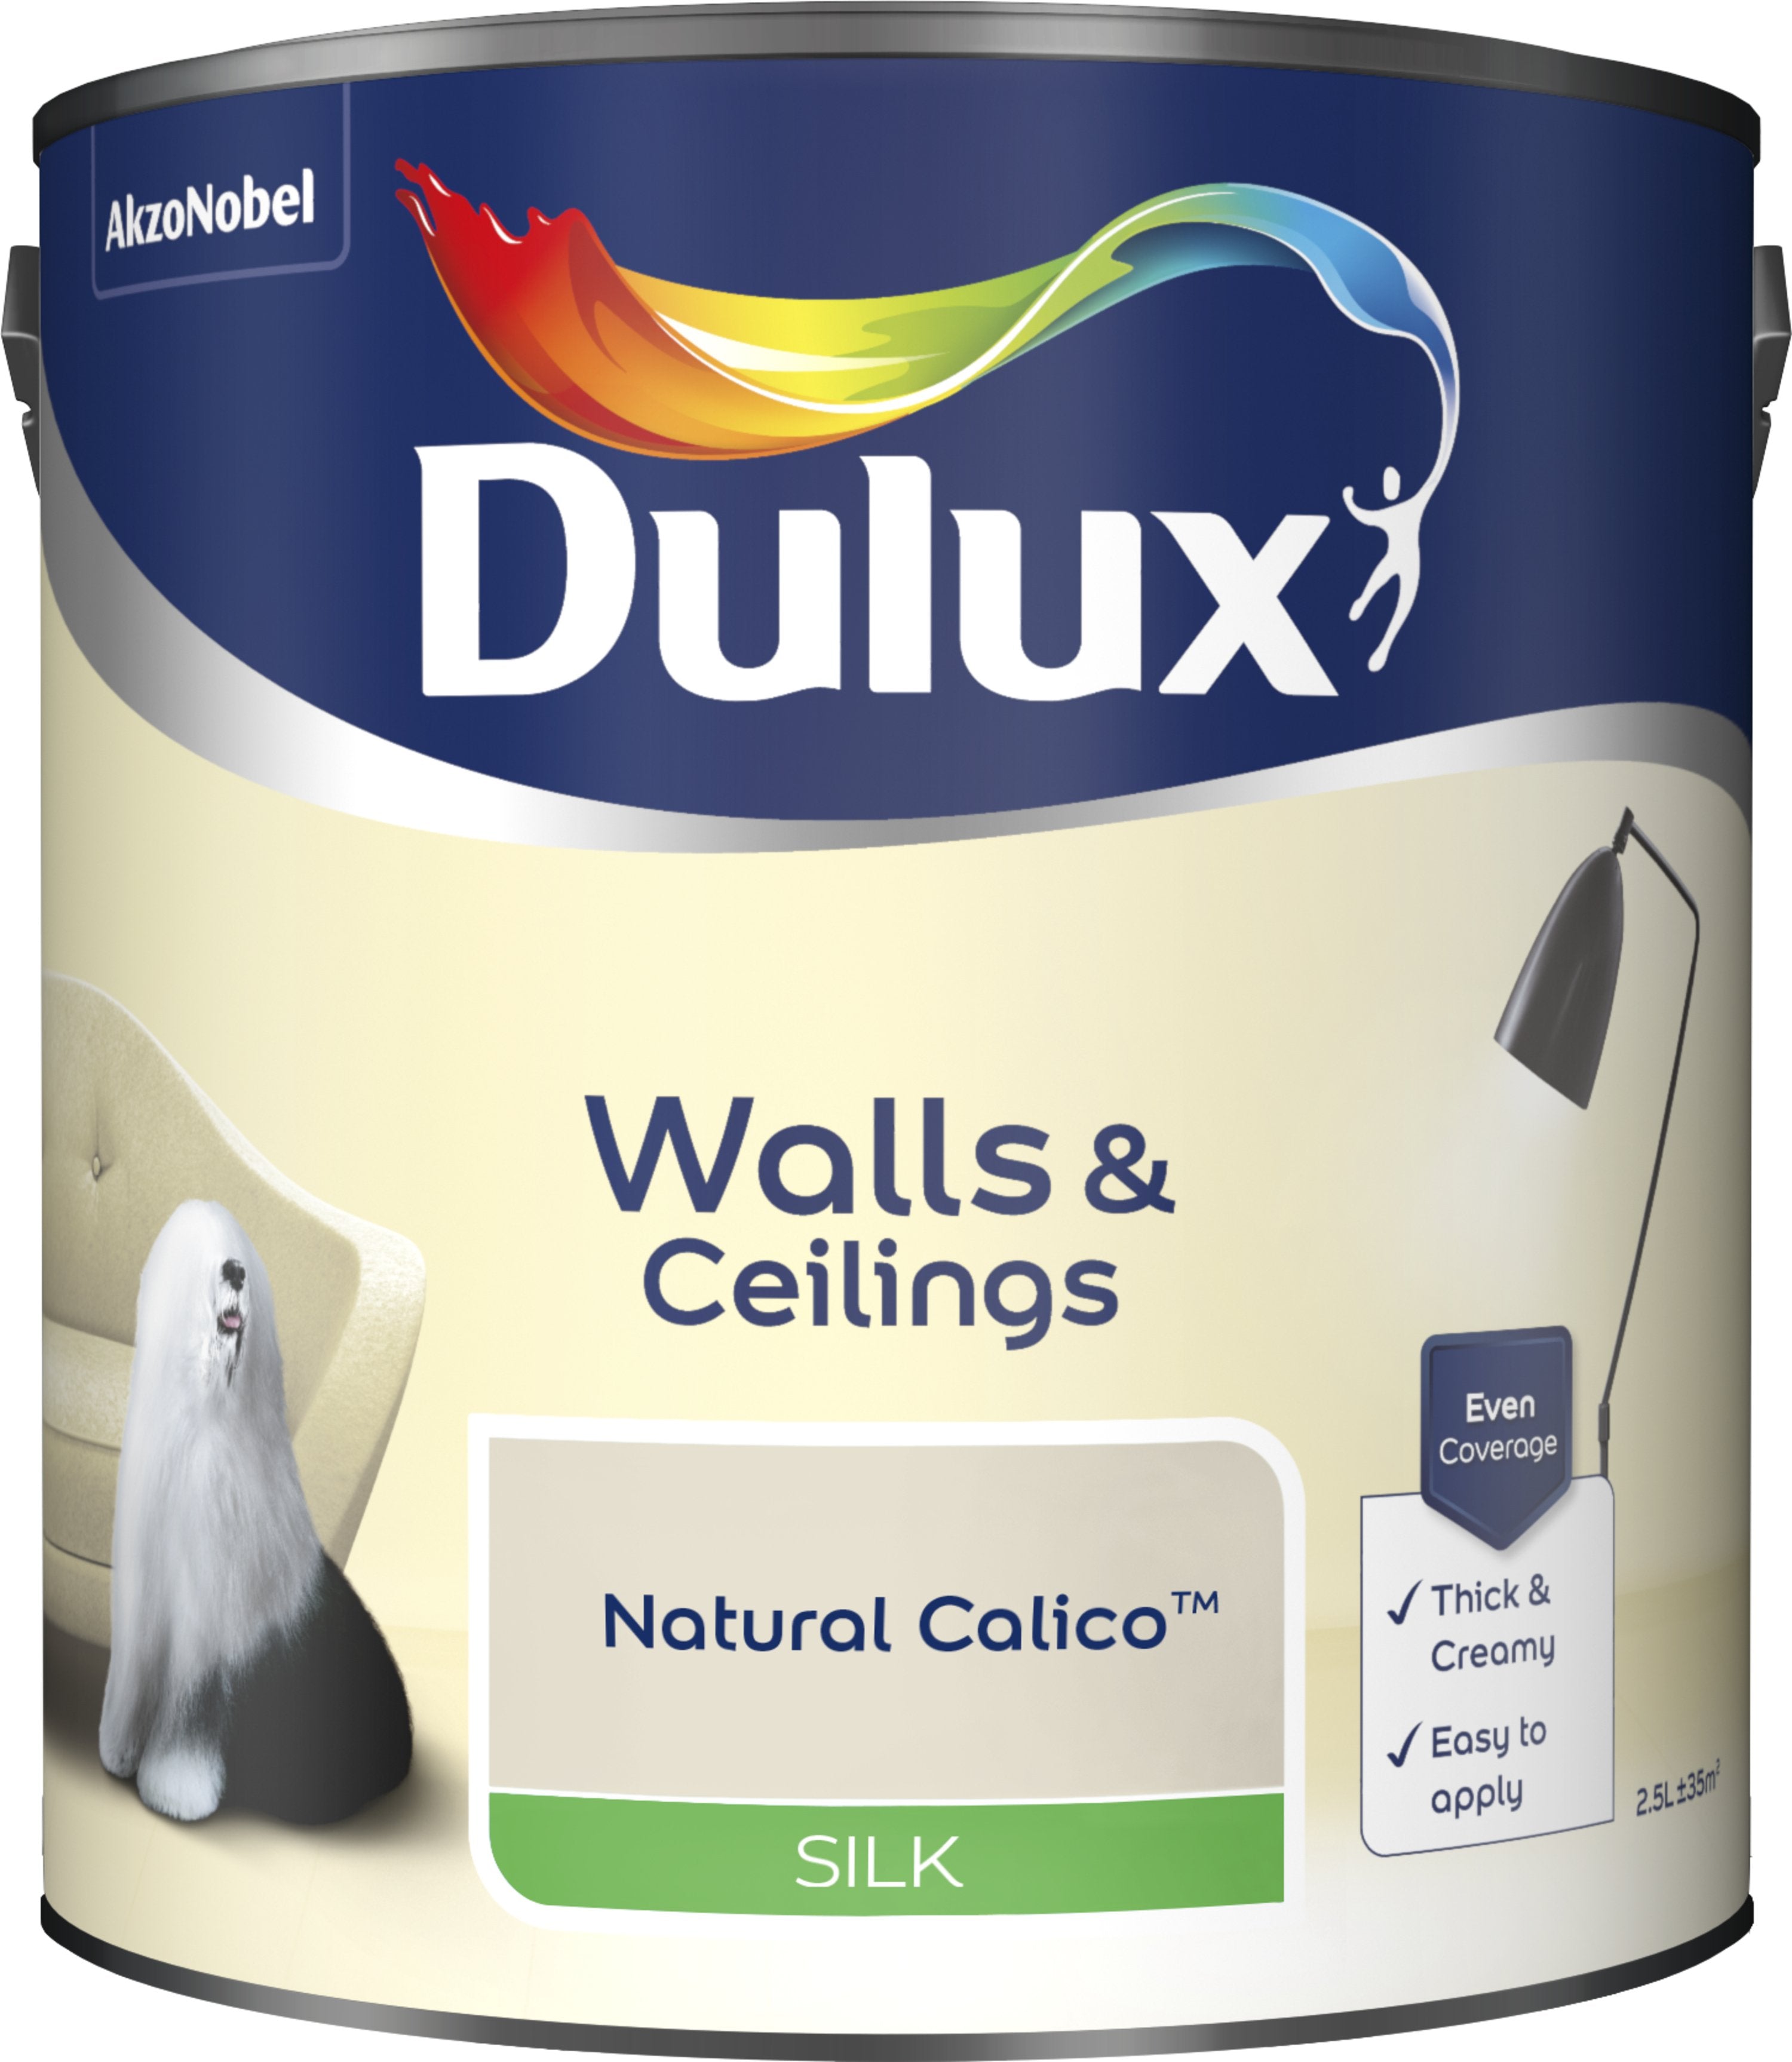 Dulux Silk Emulsion Paint For Walls And Ceilings - Natural Calico 2.5L Garden & Diy  Home